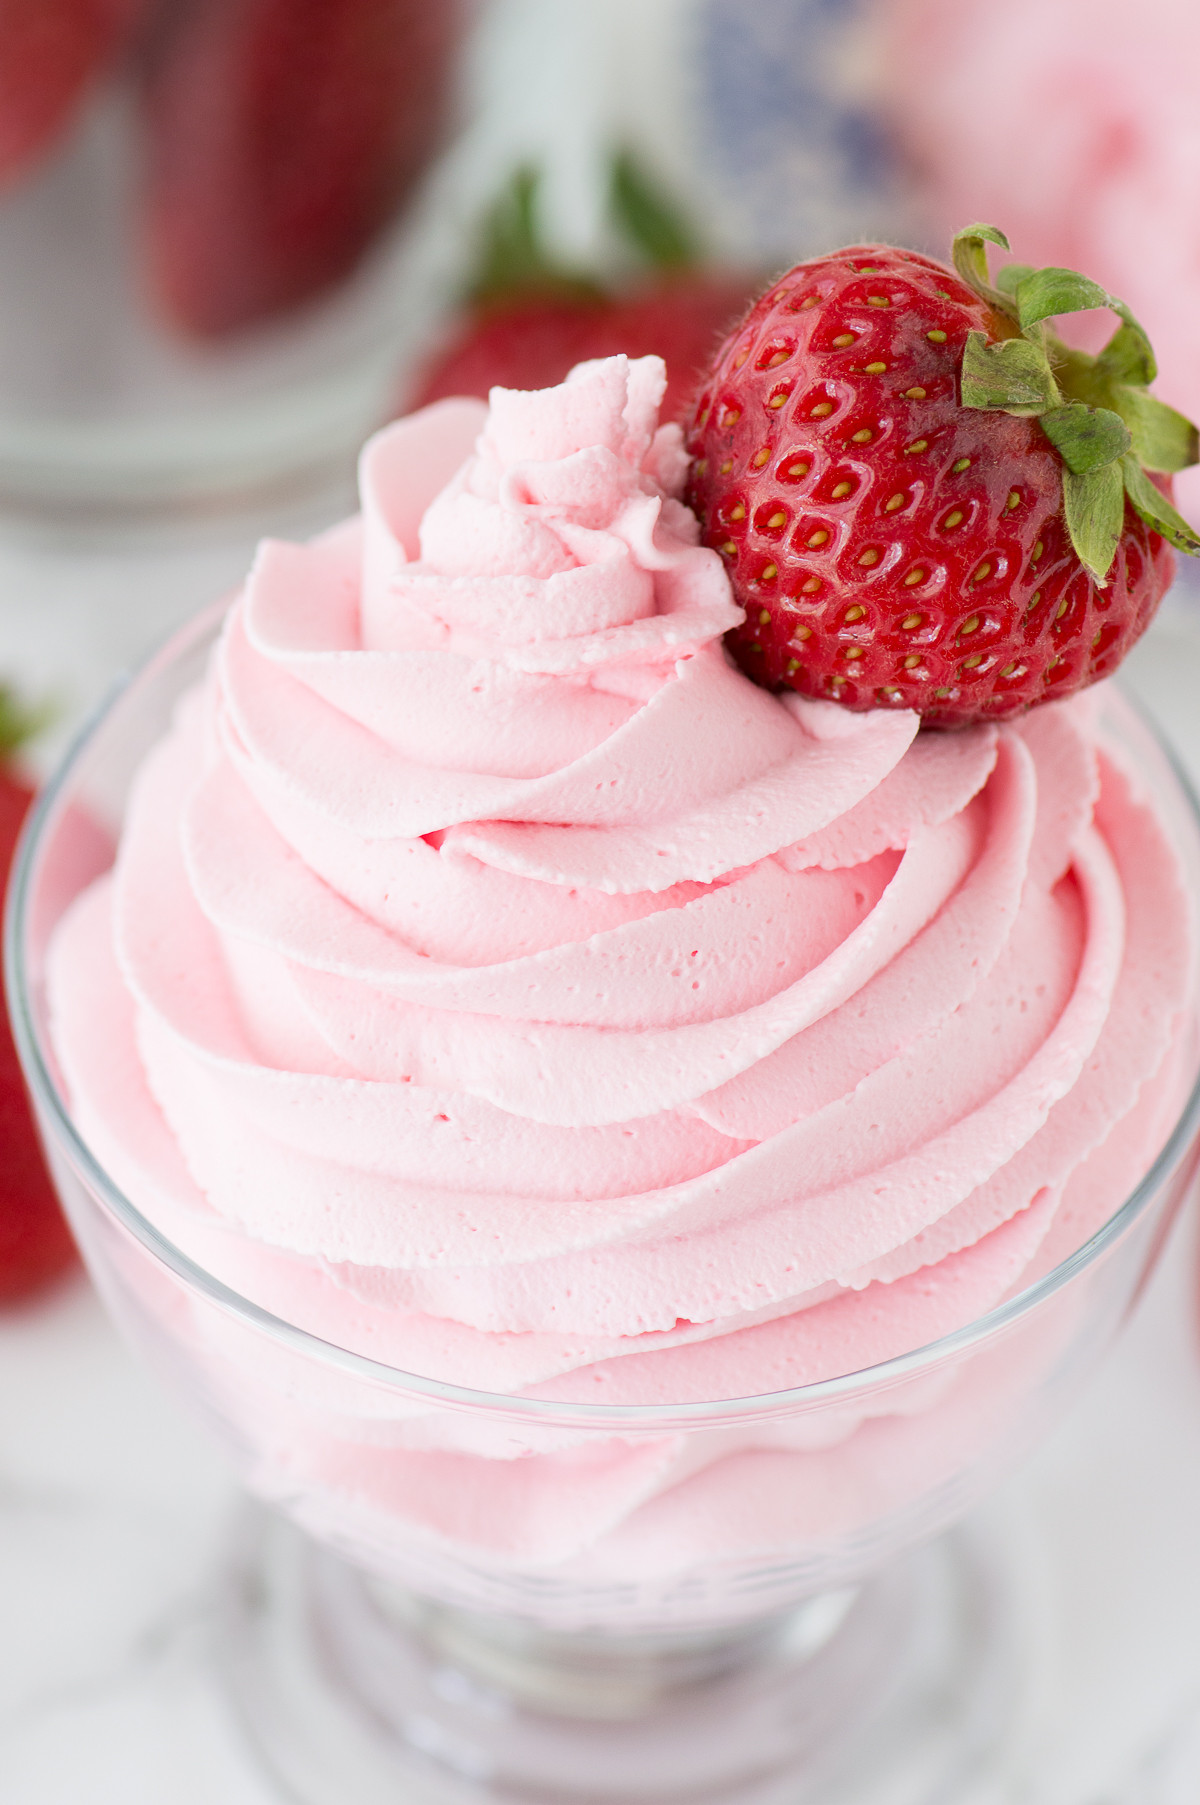 Whipped Cream Desserts
 Strawberry Whipped Cream